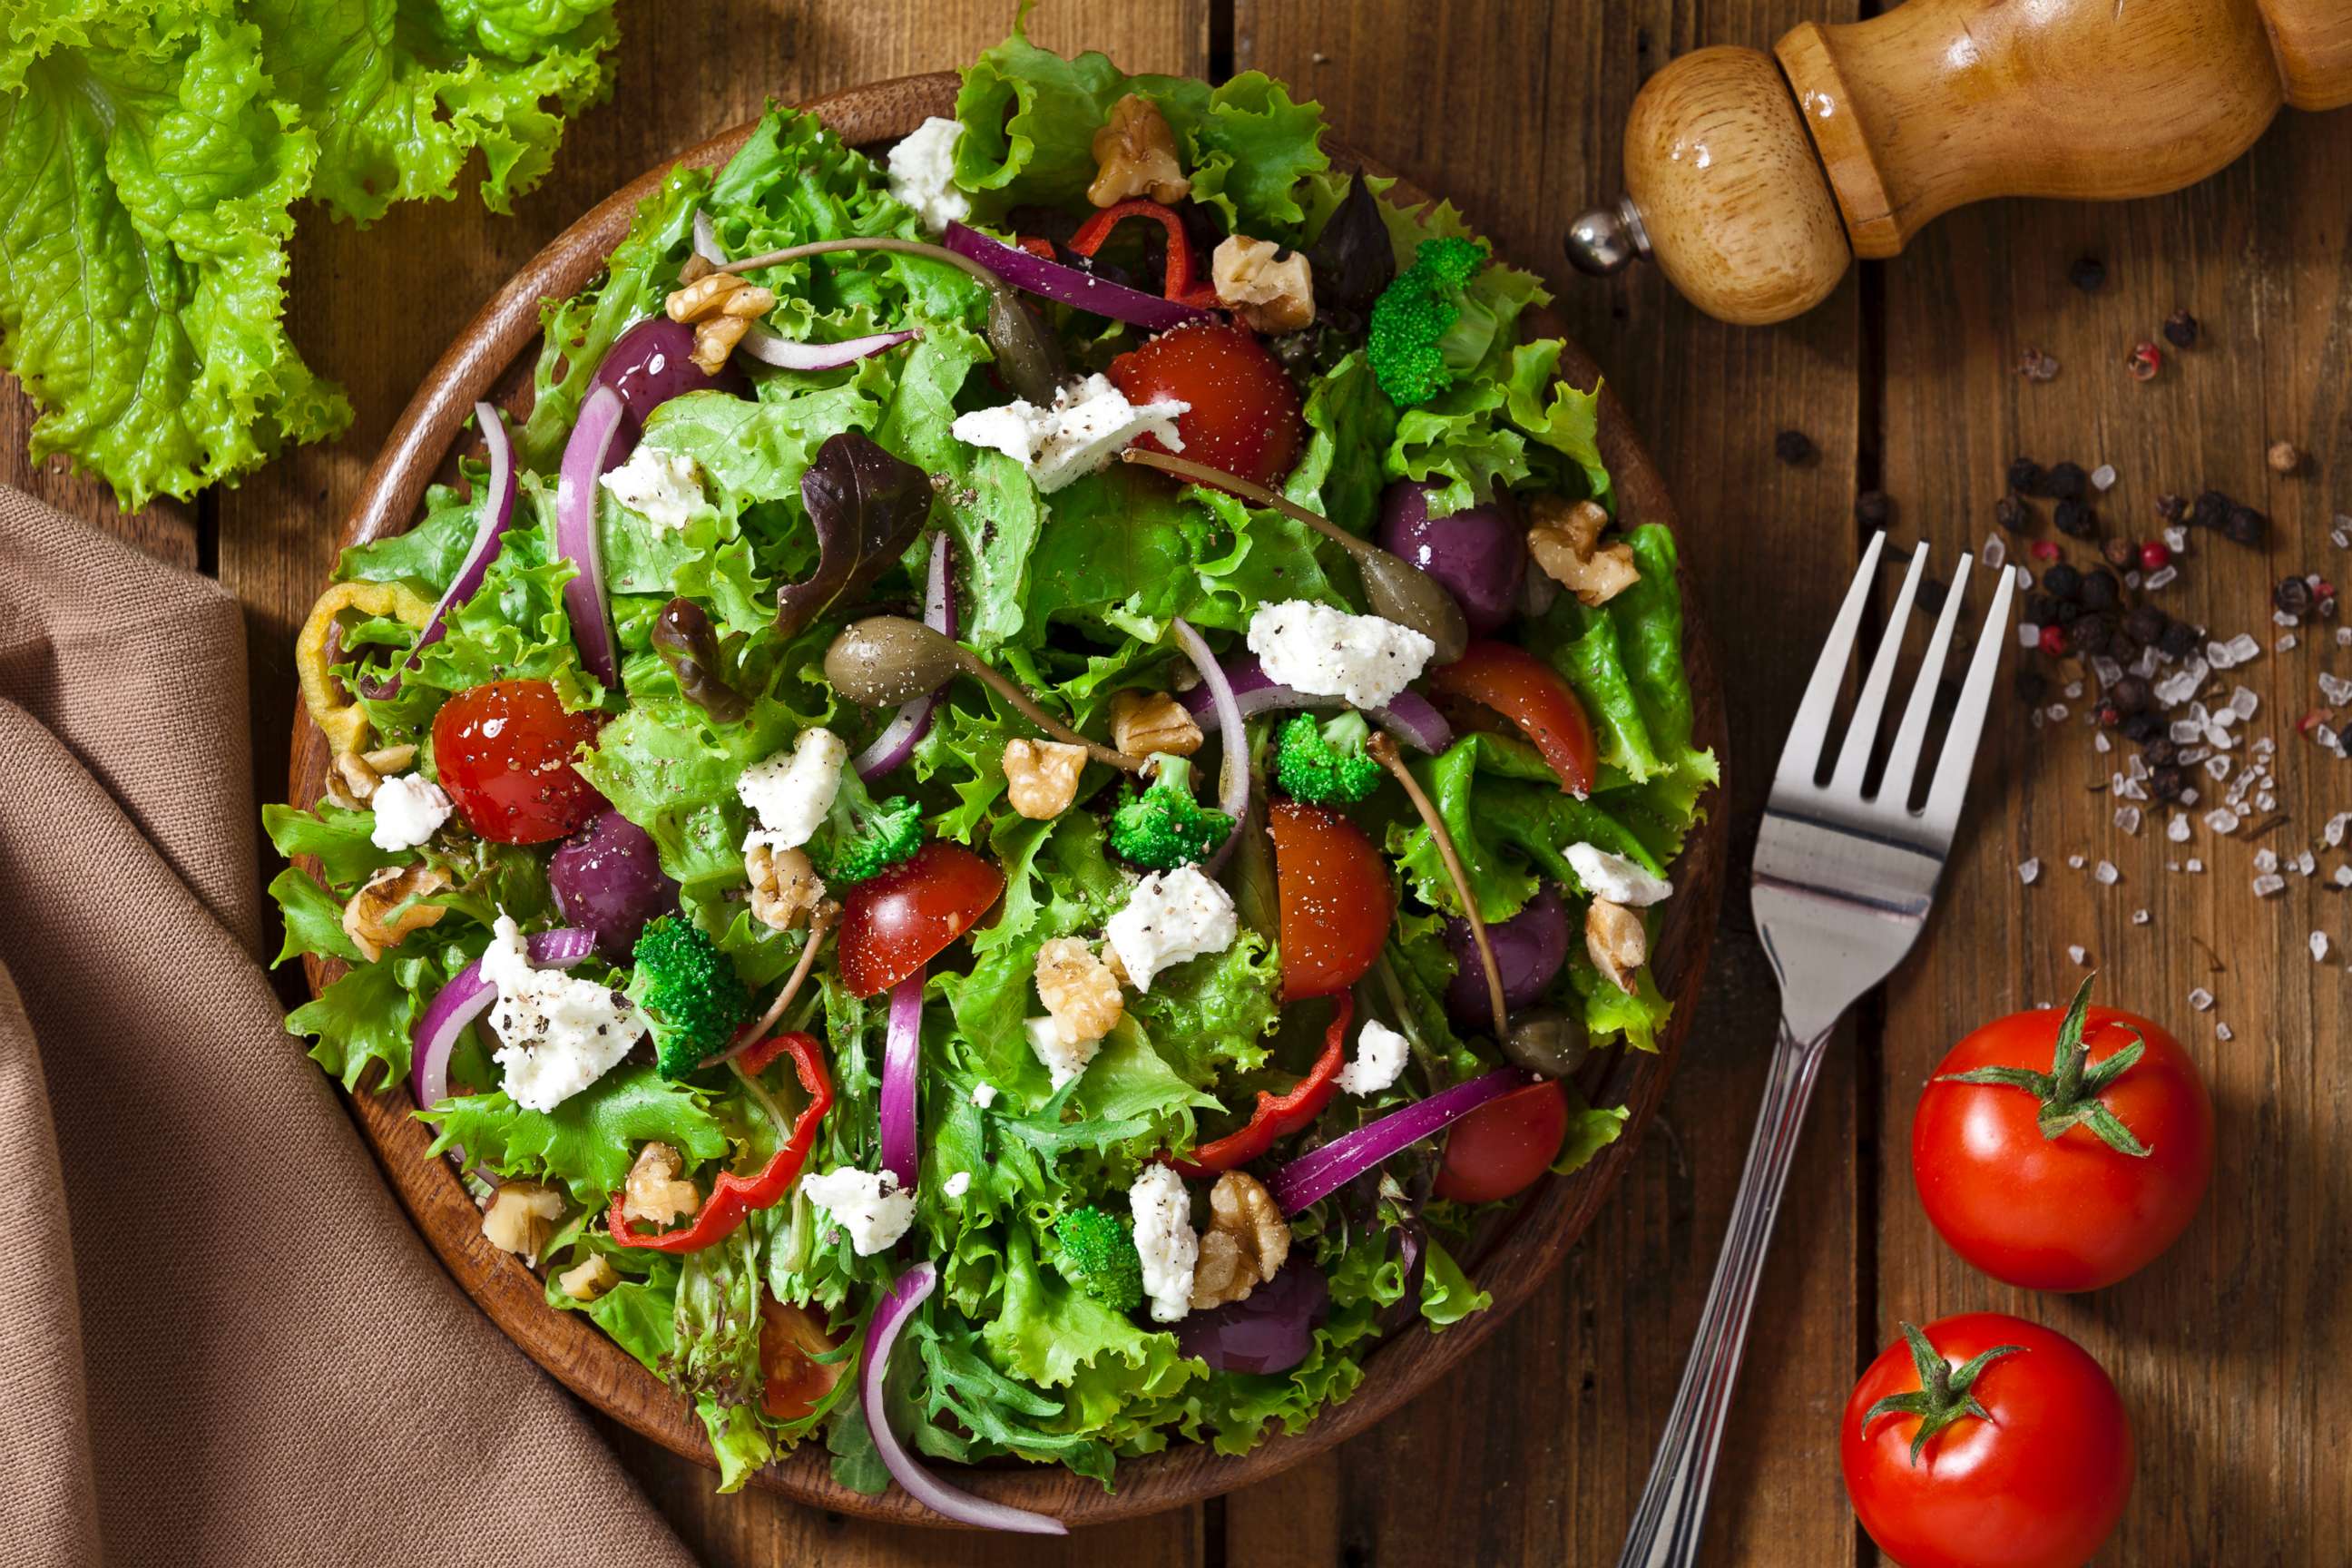 PHOTO: A colorful salad is pictured in this undated stock photo.